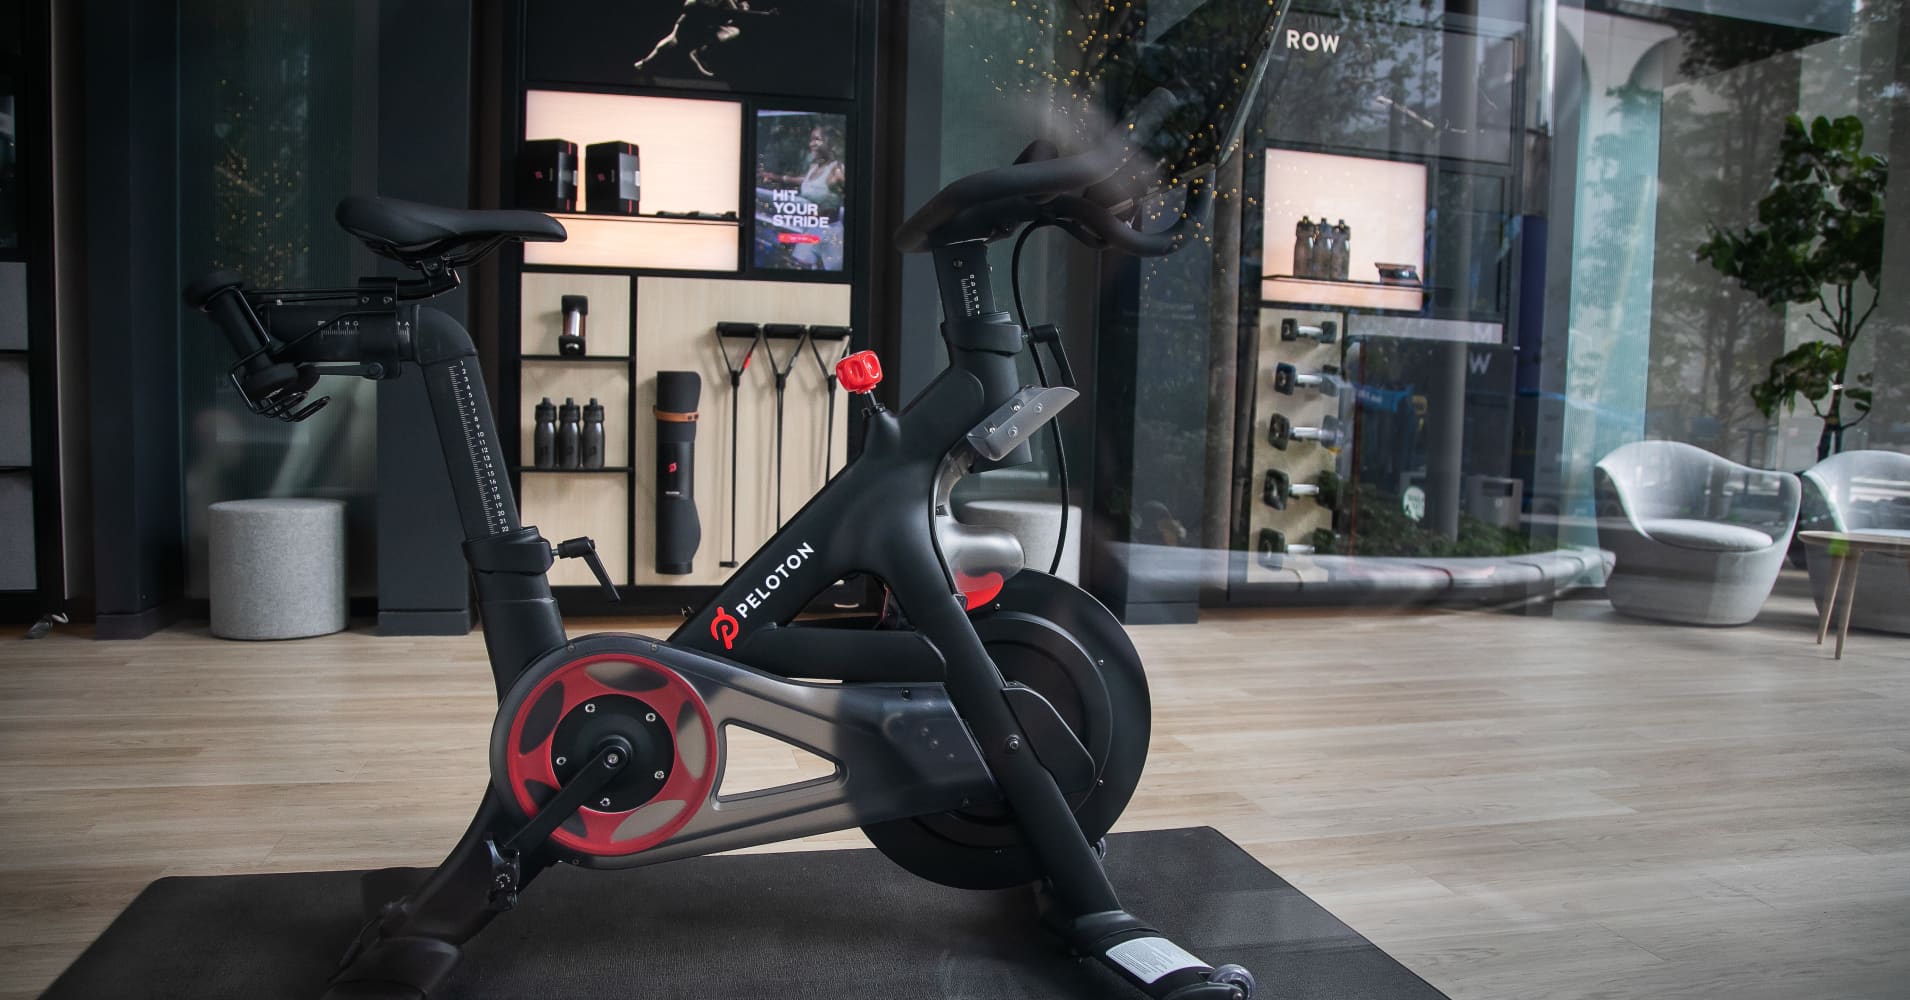 microsoft, here's how much money you'd have lost if you invested $1,000 in peloton when it went public